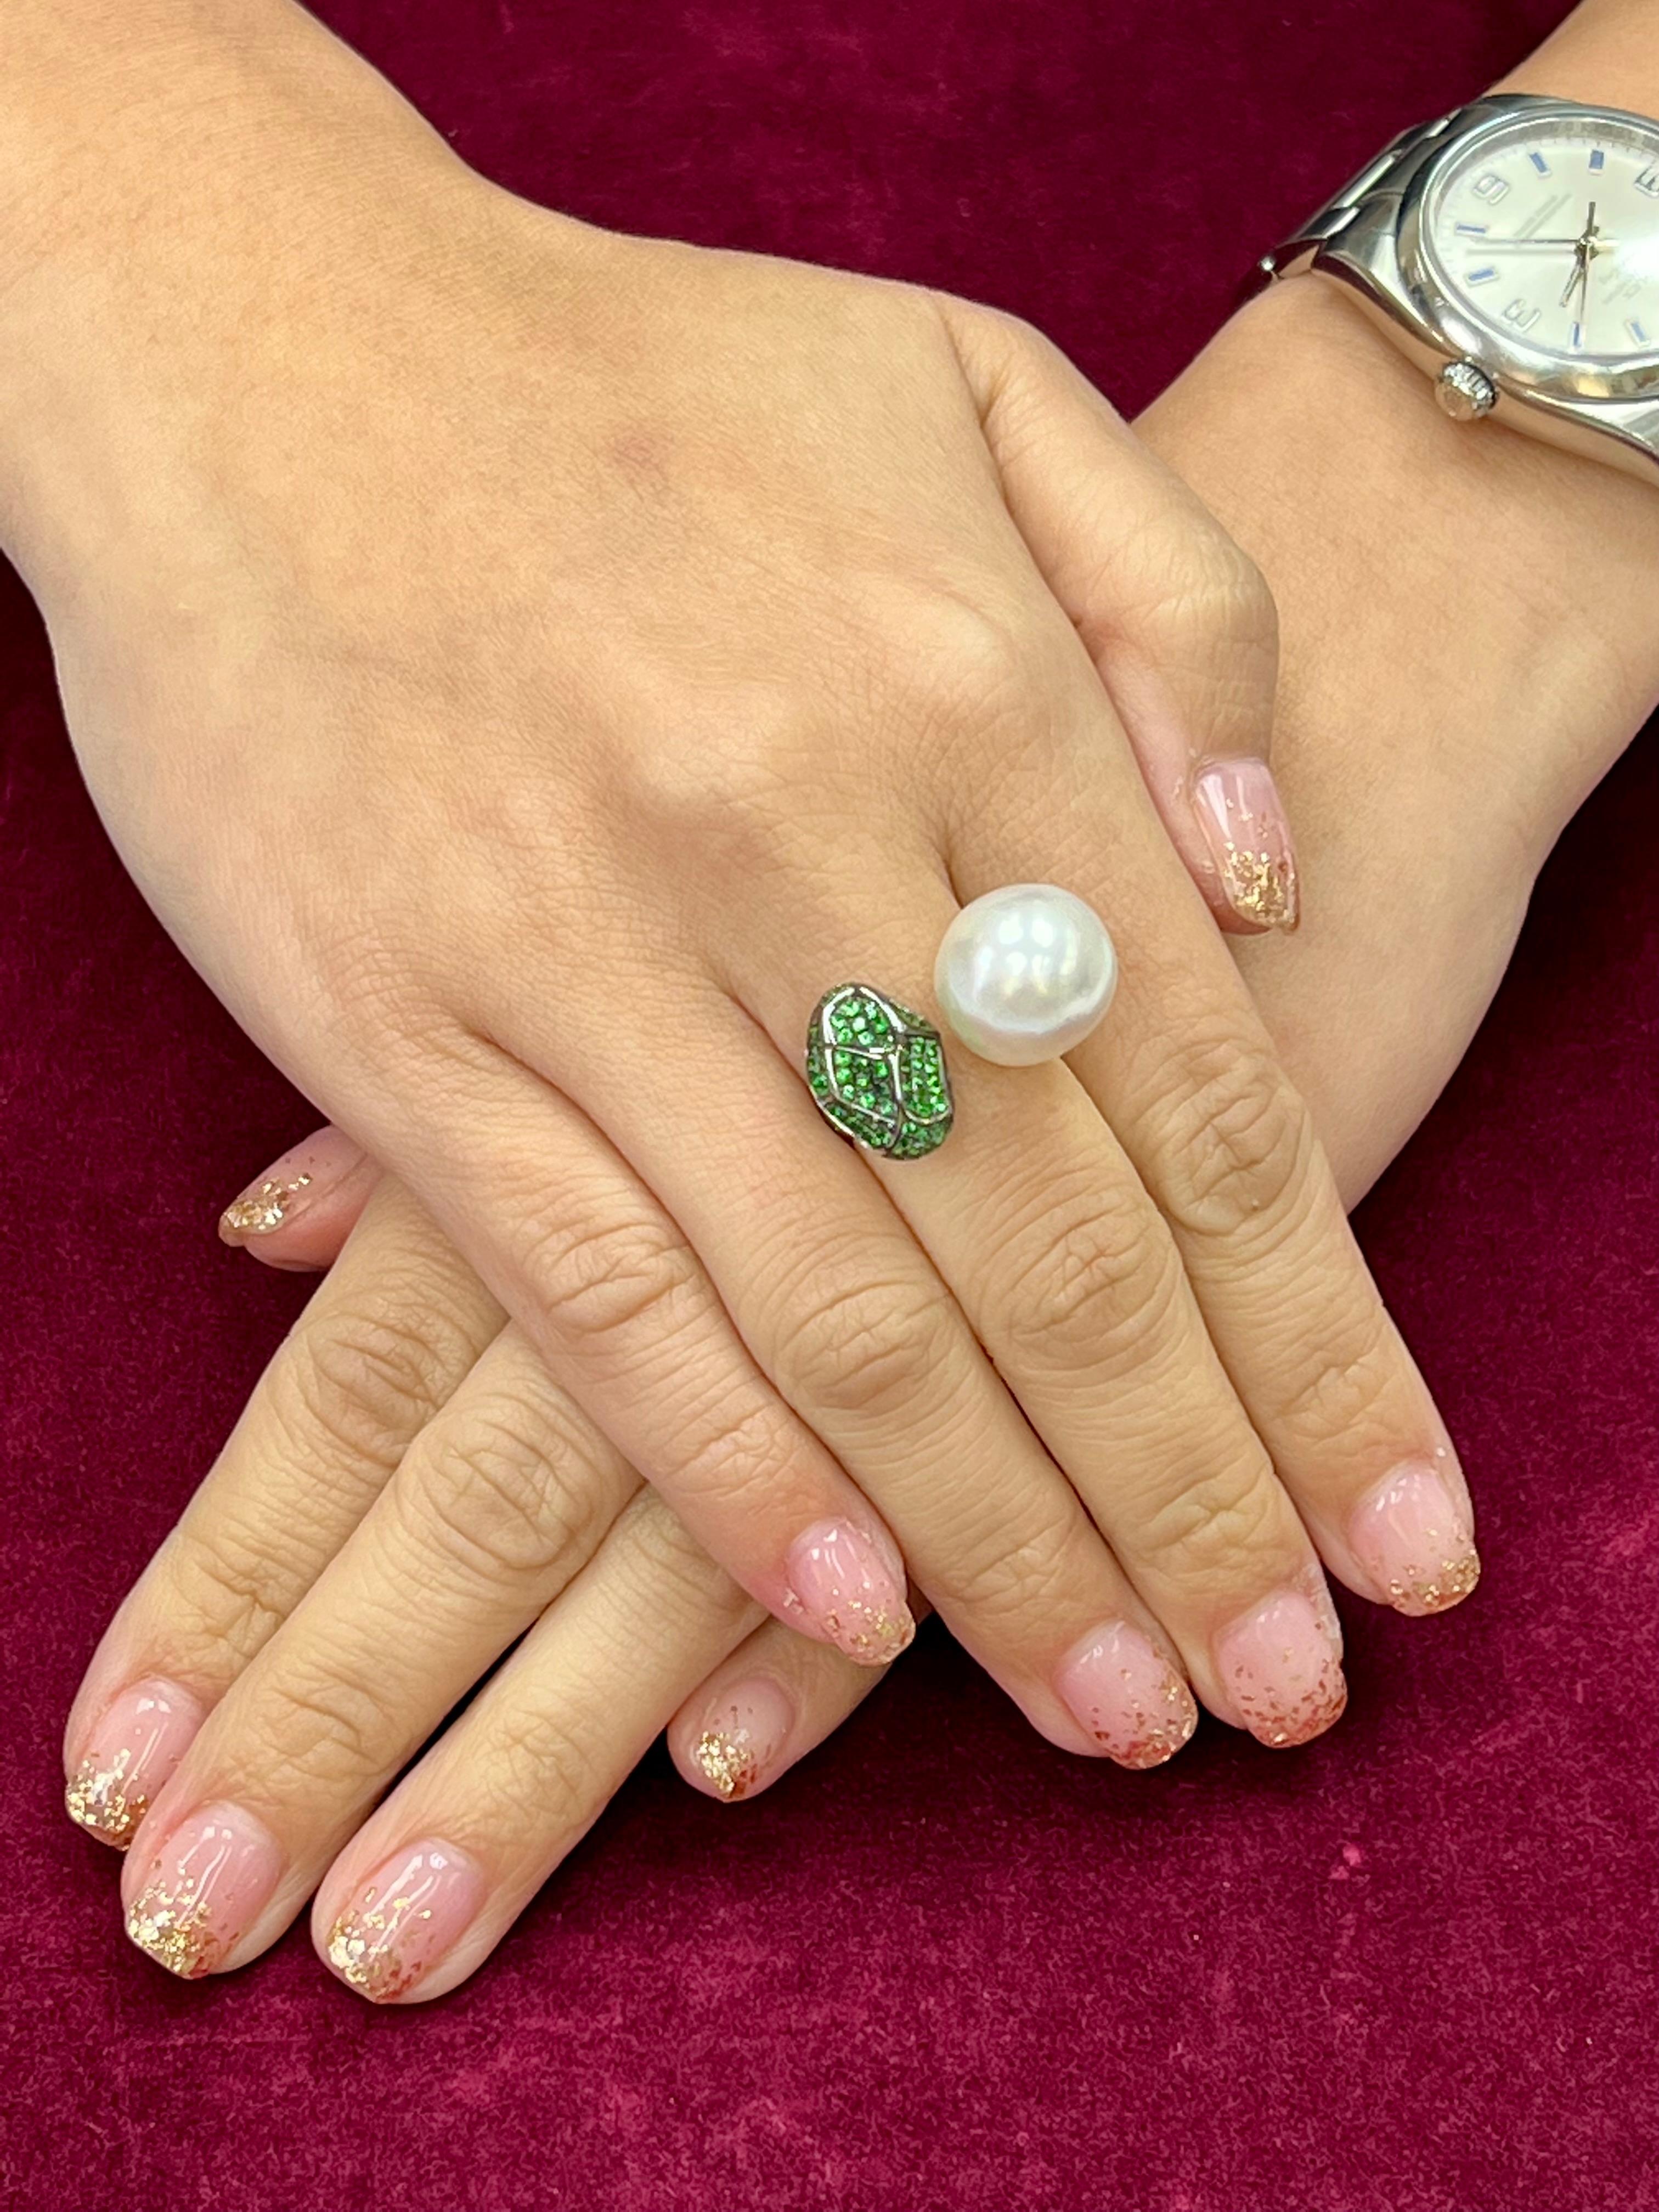 Please check out the HD video. This is a special South Sea pearl and Tsavorite cocktail ring. The center south sea pearl is 13.8 - 14.4 mm. This high quality pearl is almost round, has nice skin and high luster. The color is silver white. The ring